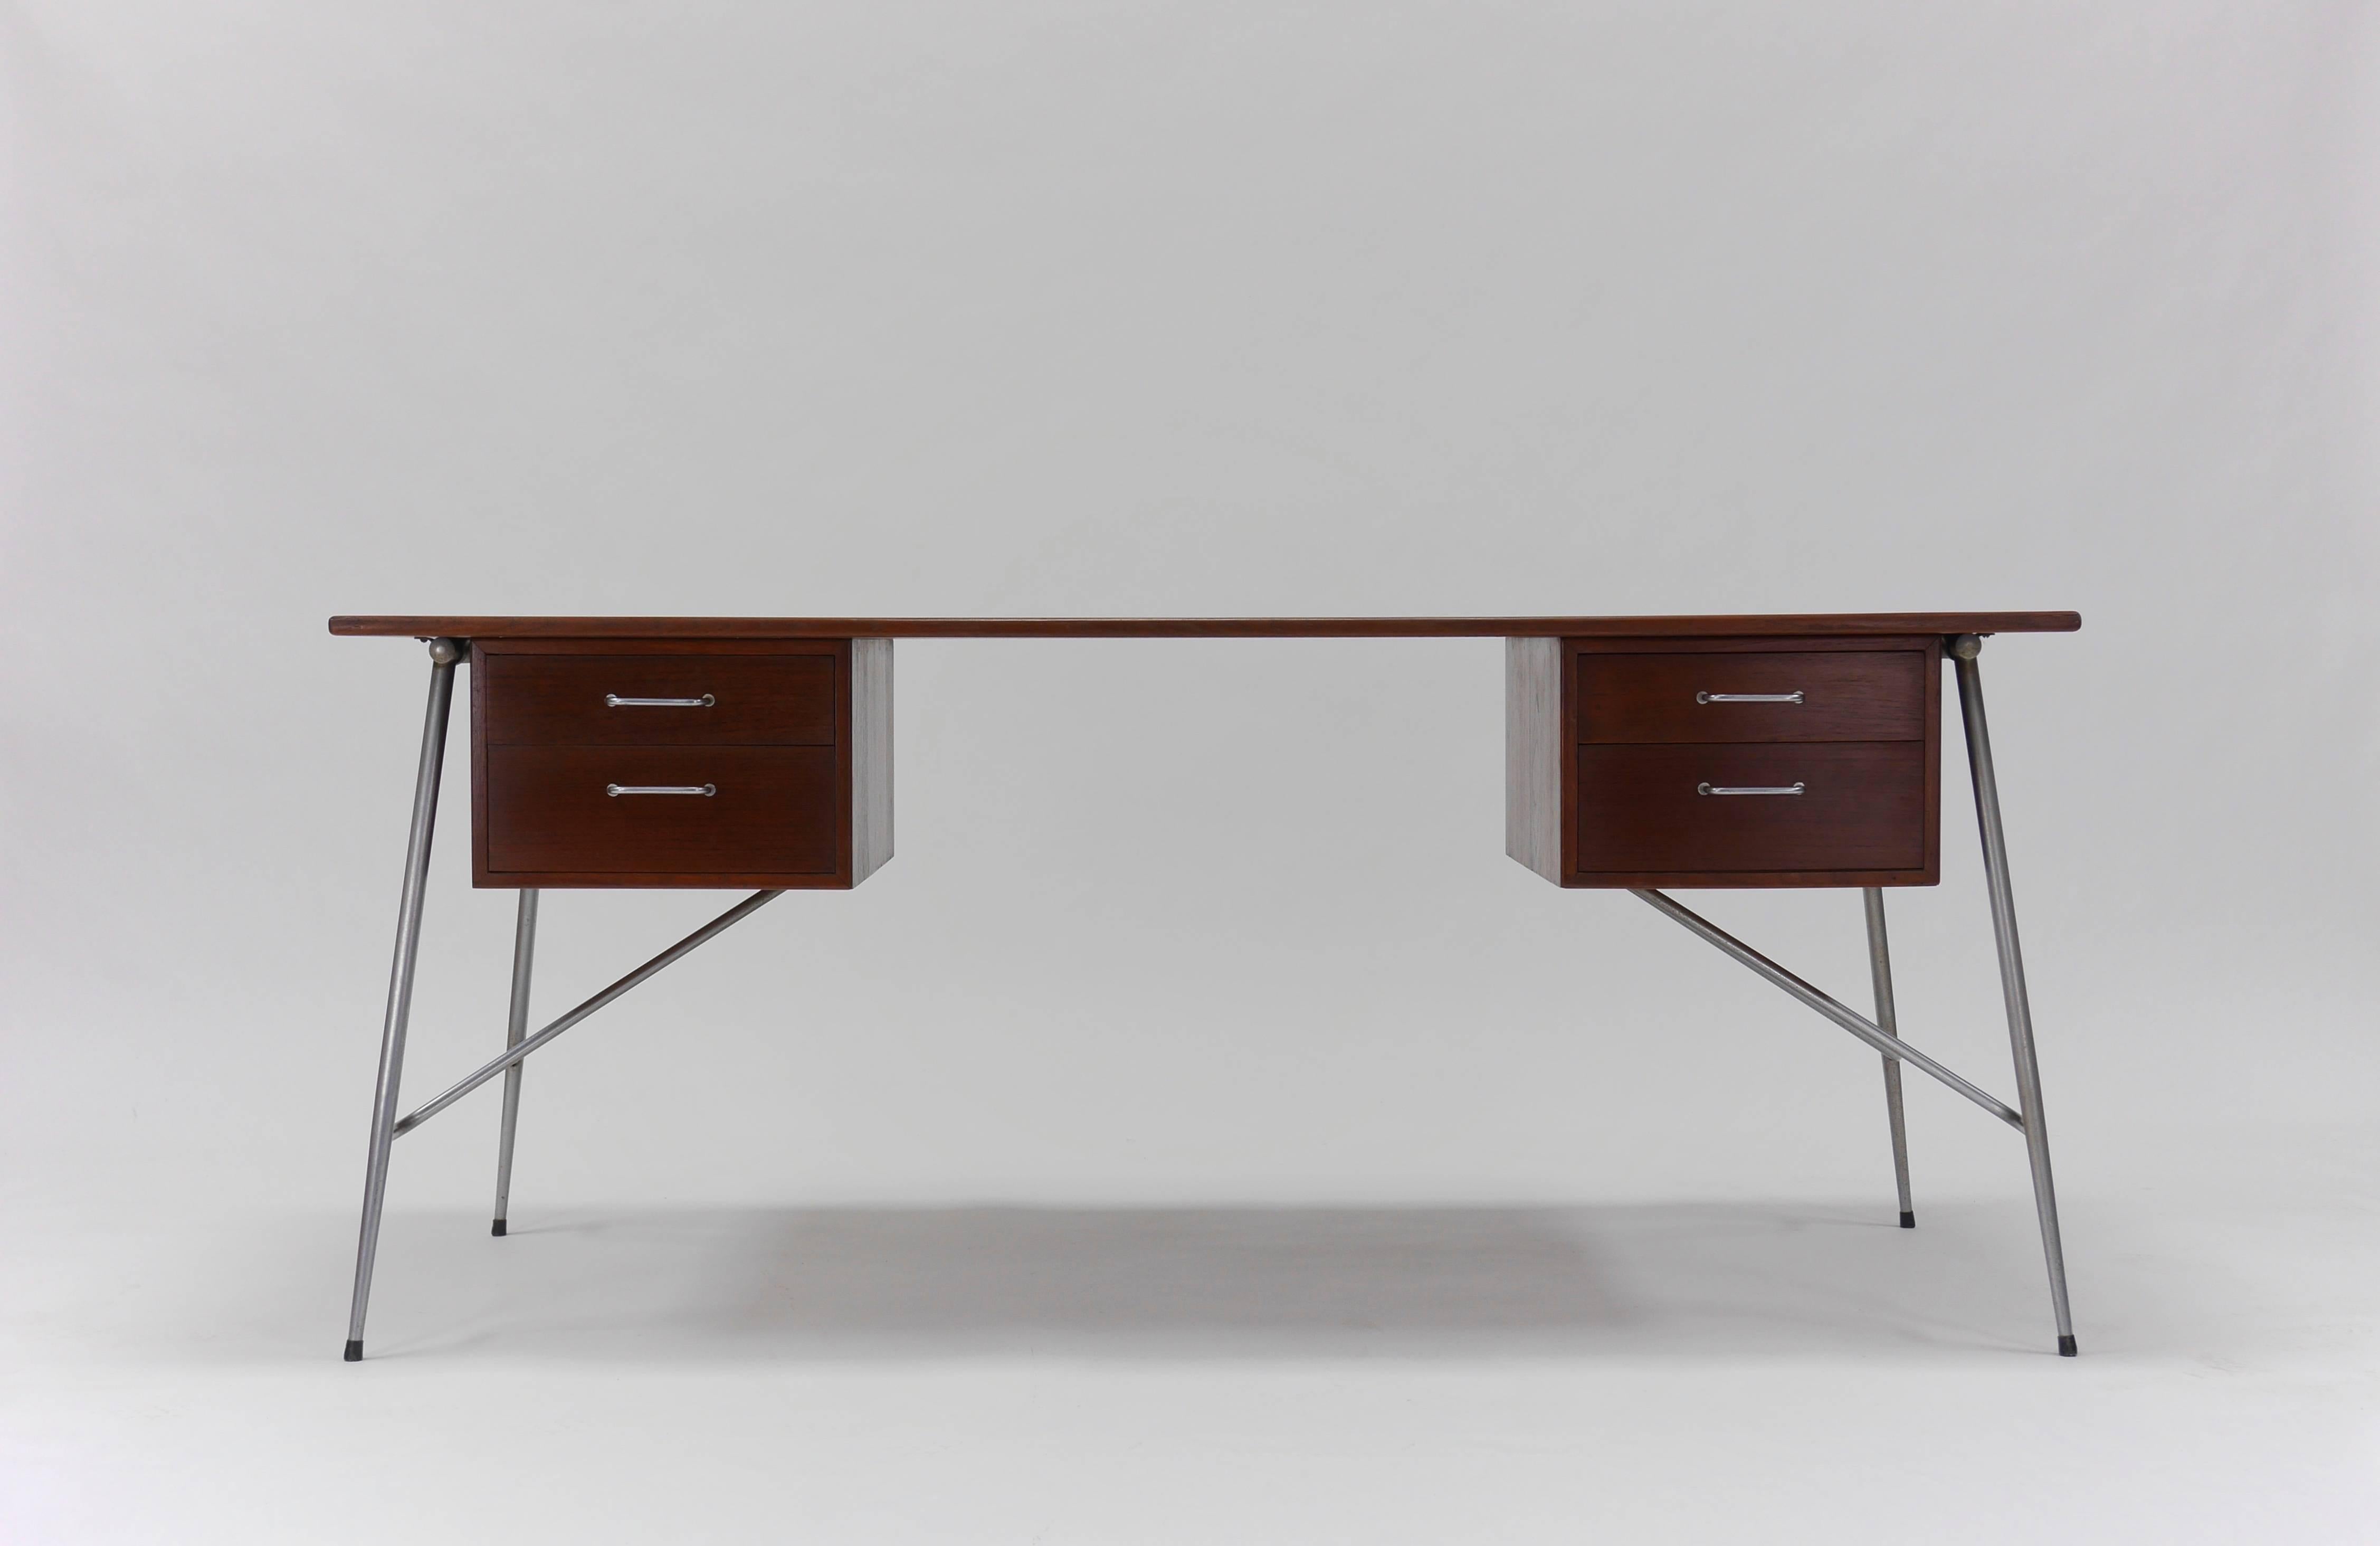 Rare to market, desk model 202 by Børge Mogensen for Soborg Mobelfabrik of Denmark, circa 1952. Having a large Teak writing surface, two pair of underhung drawers, and satin chrome legs. Very good original condition, showing even patina with light